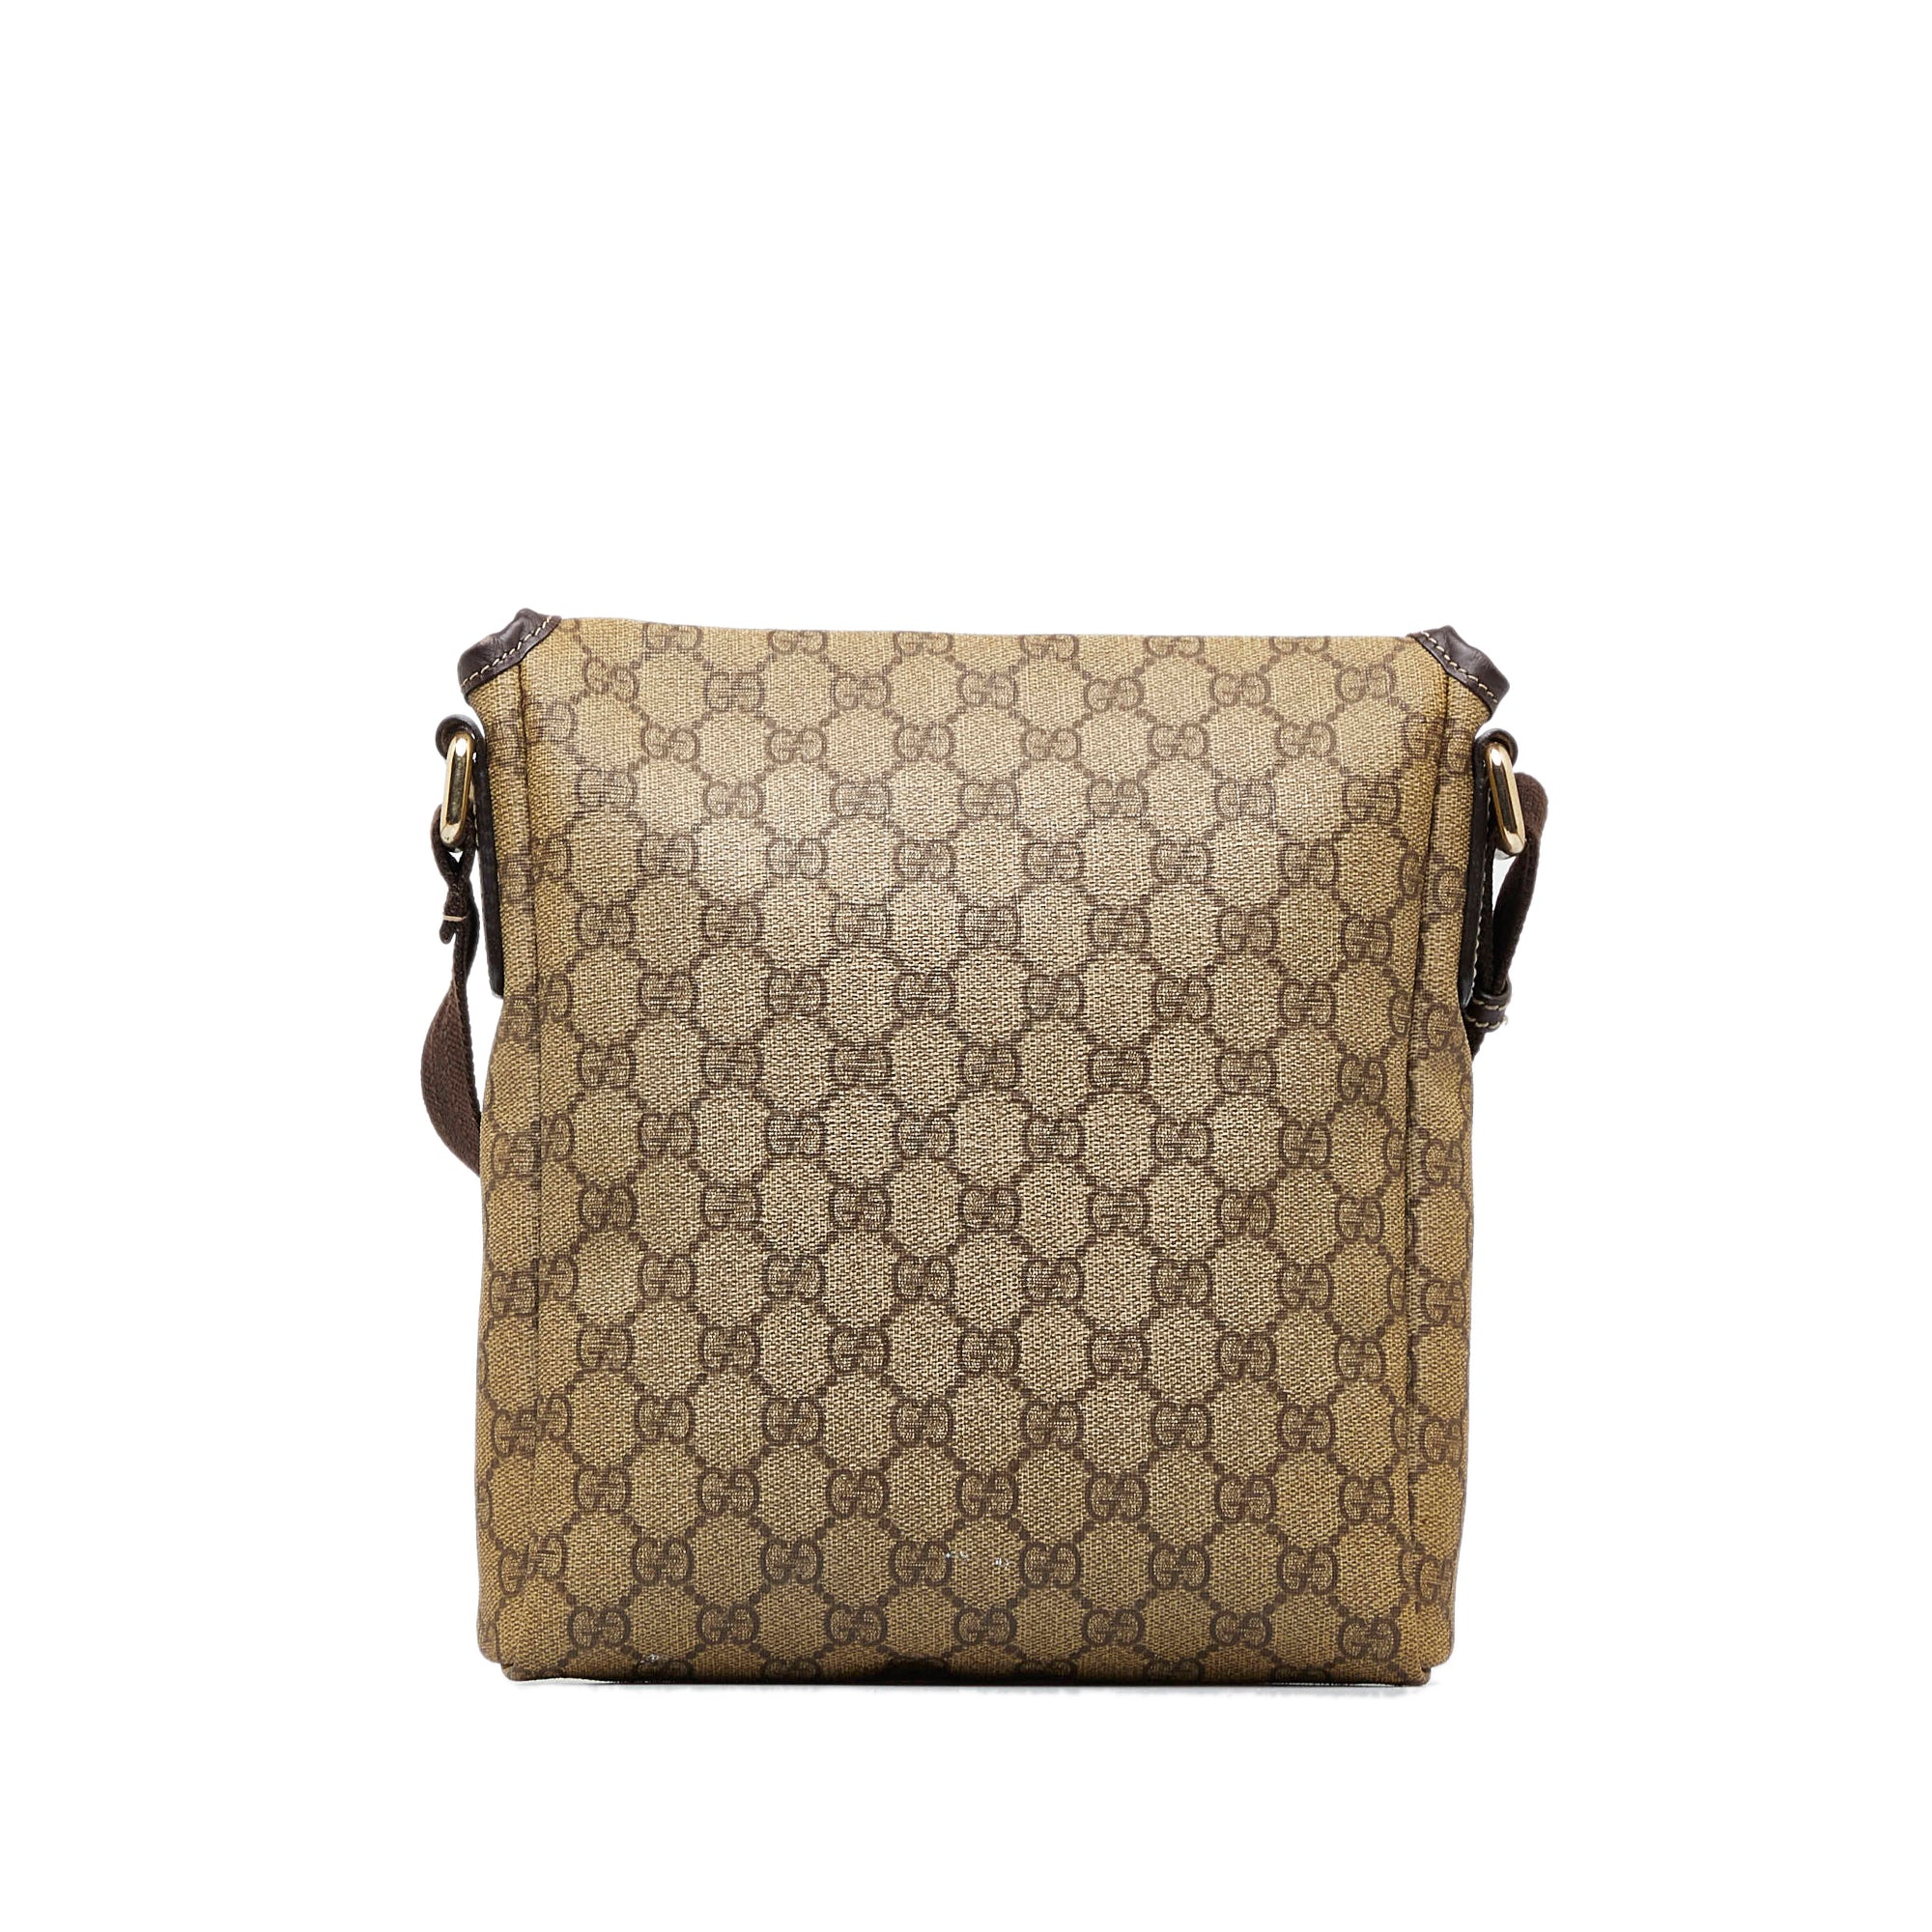 New Gucci Beige Brown Canvas Leather GG Supreme Messenger